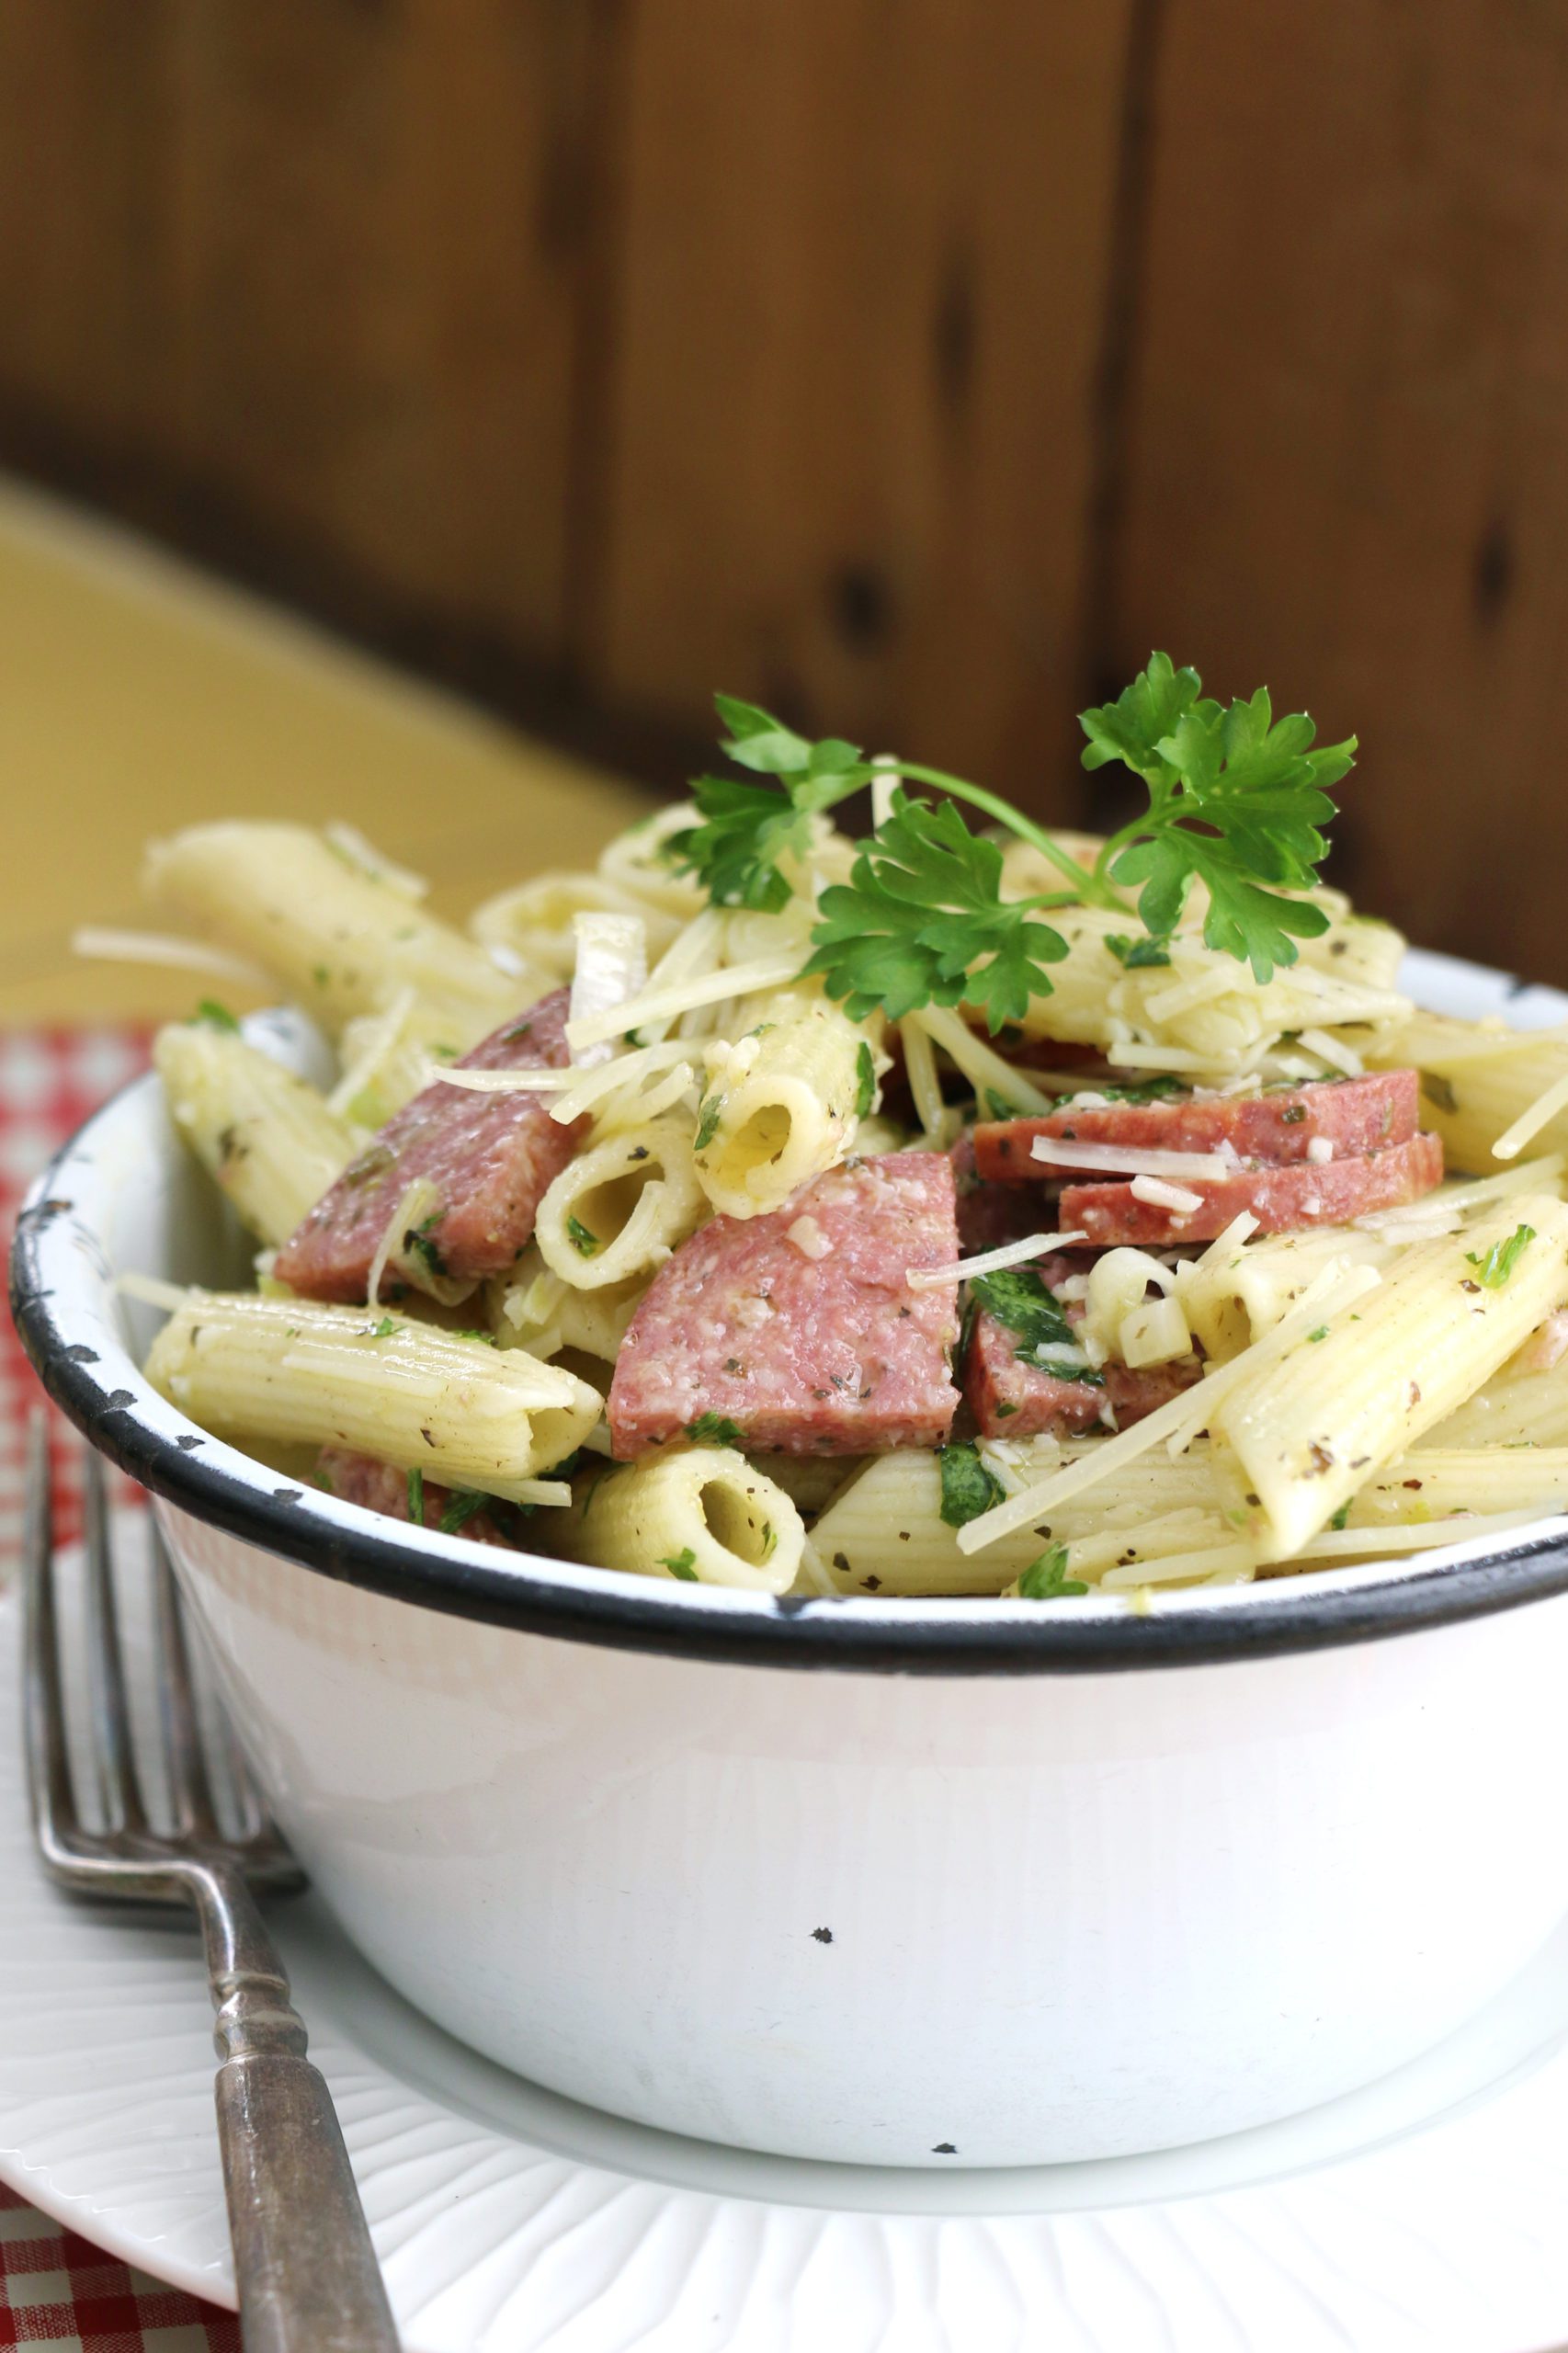 Salami Pasta Salad For People Who Like Picnics and Penne, and How to Buy Quality Olive Oil